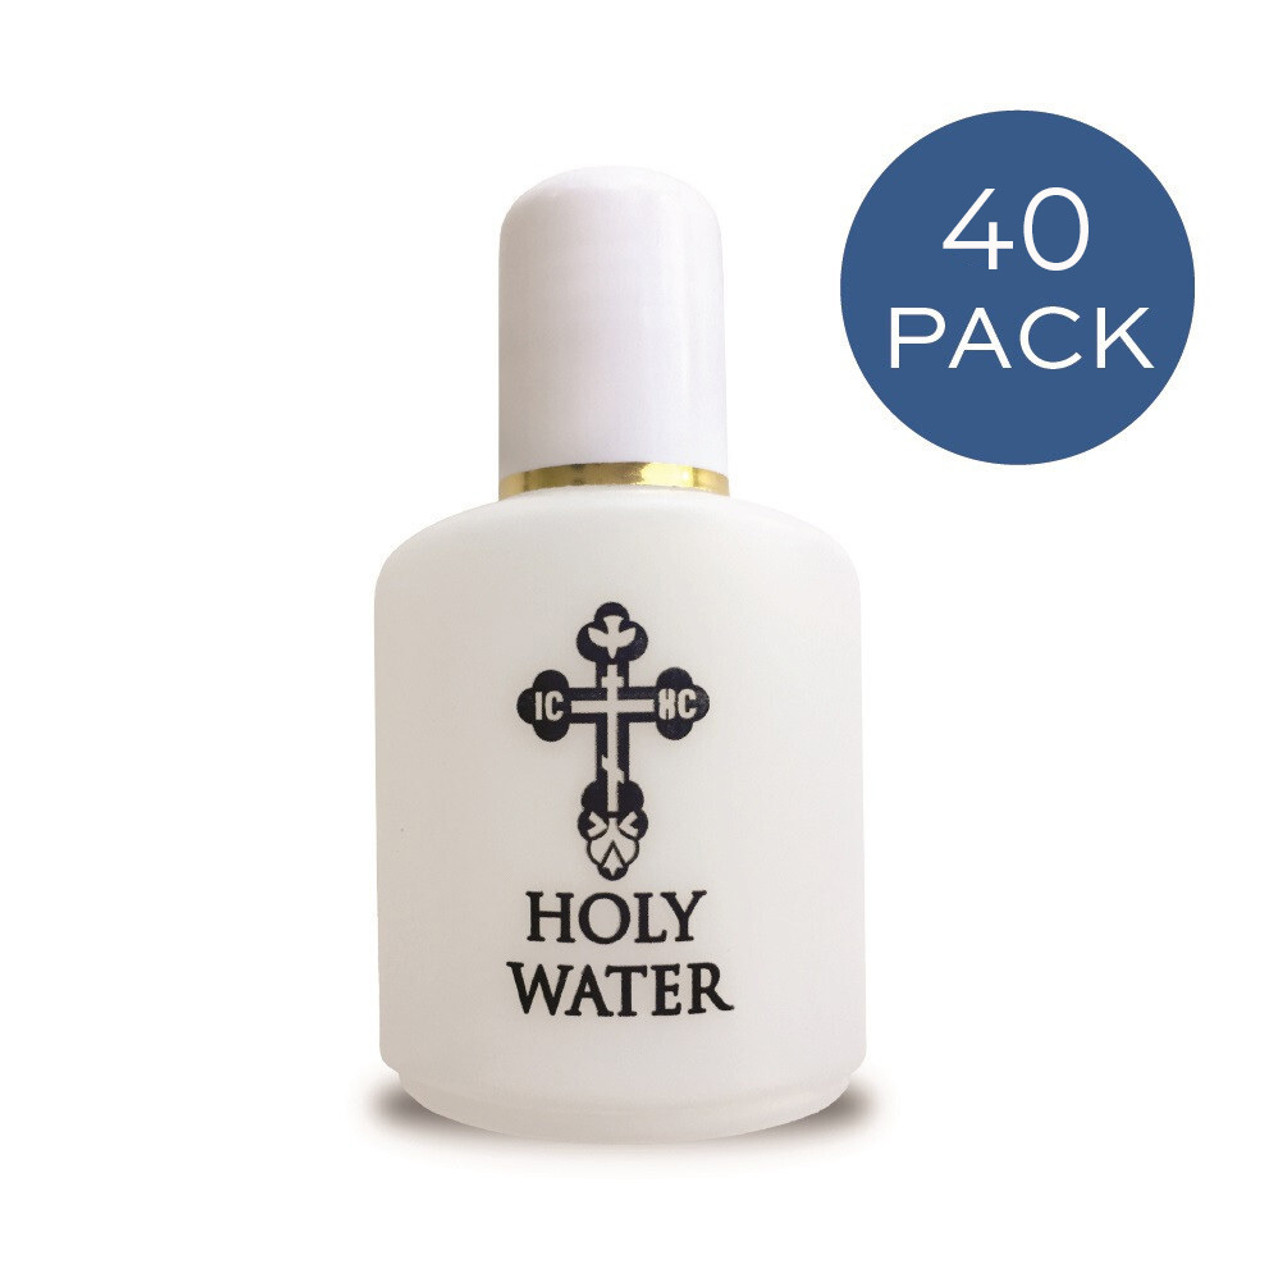 https://cdn11.bigcommerce.com/s-p1cqiyfg/images/stencil/1280x1280/products/3321/8656/008037-holy-water-bottle-40-pack__68318__09042.1679336088.jpg?c=2